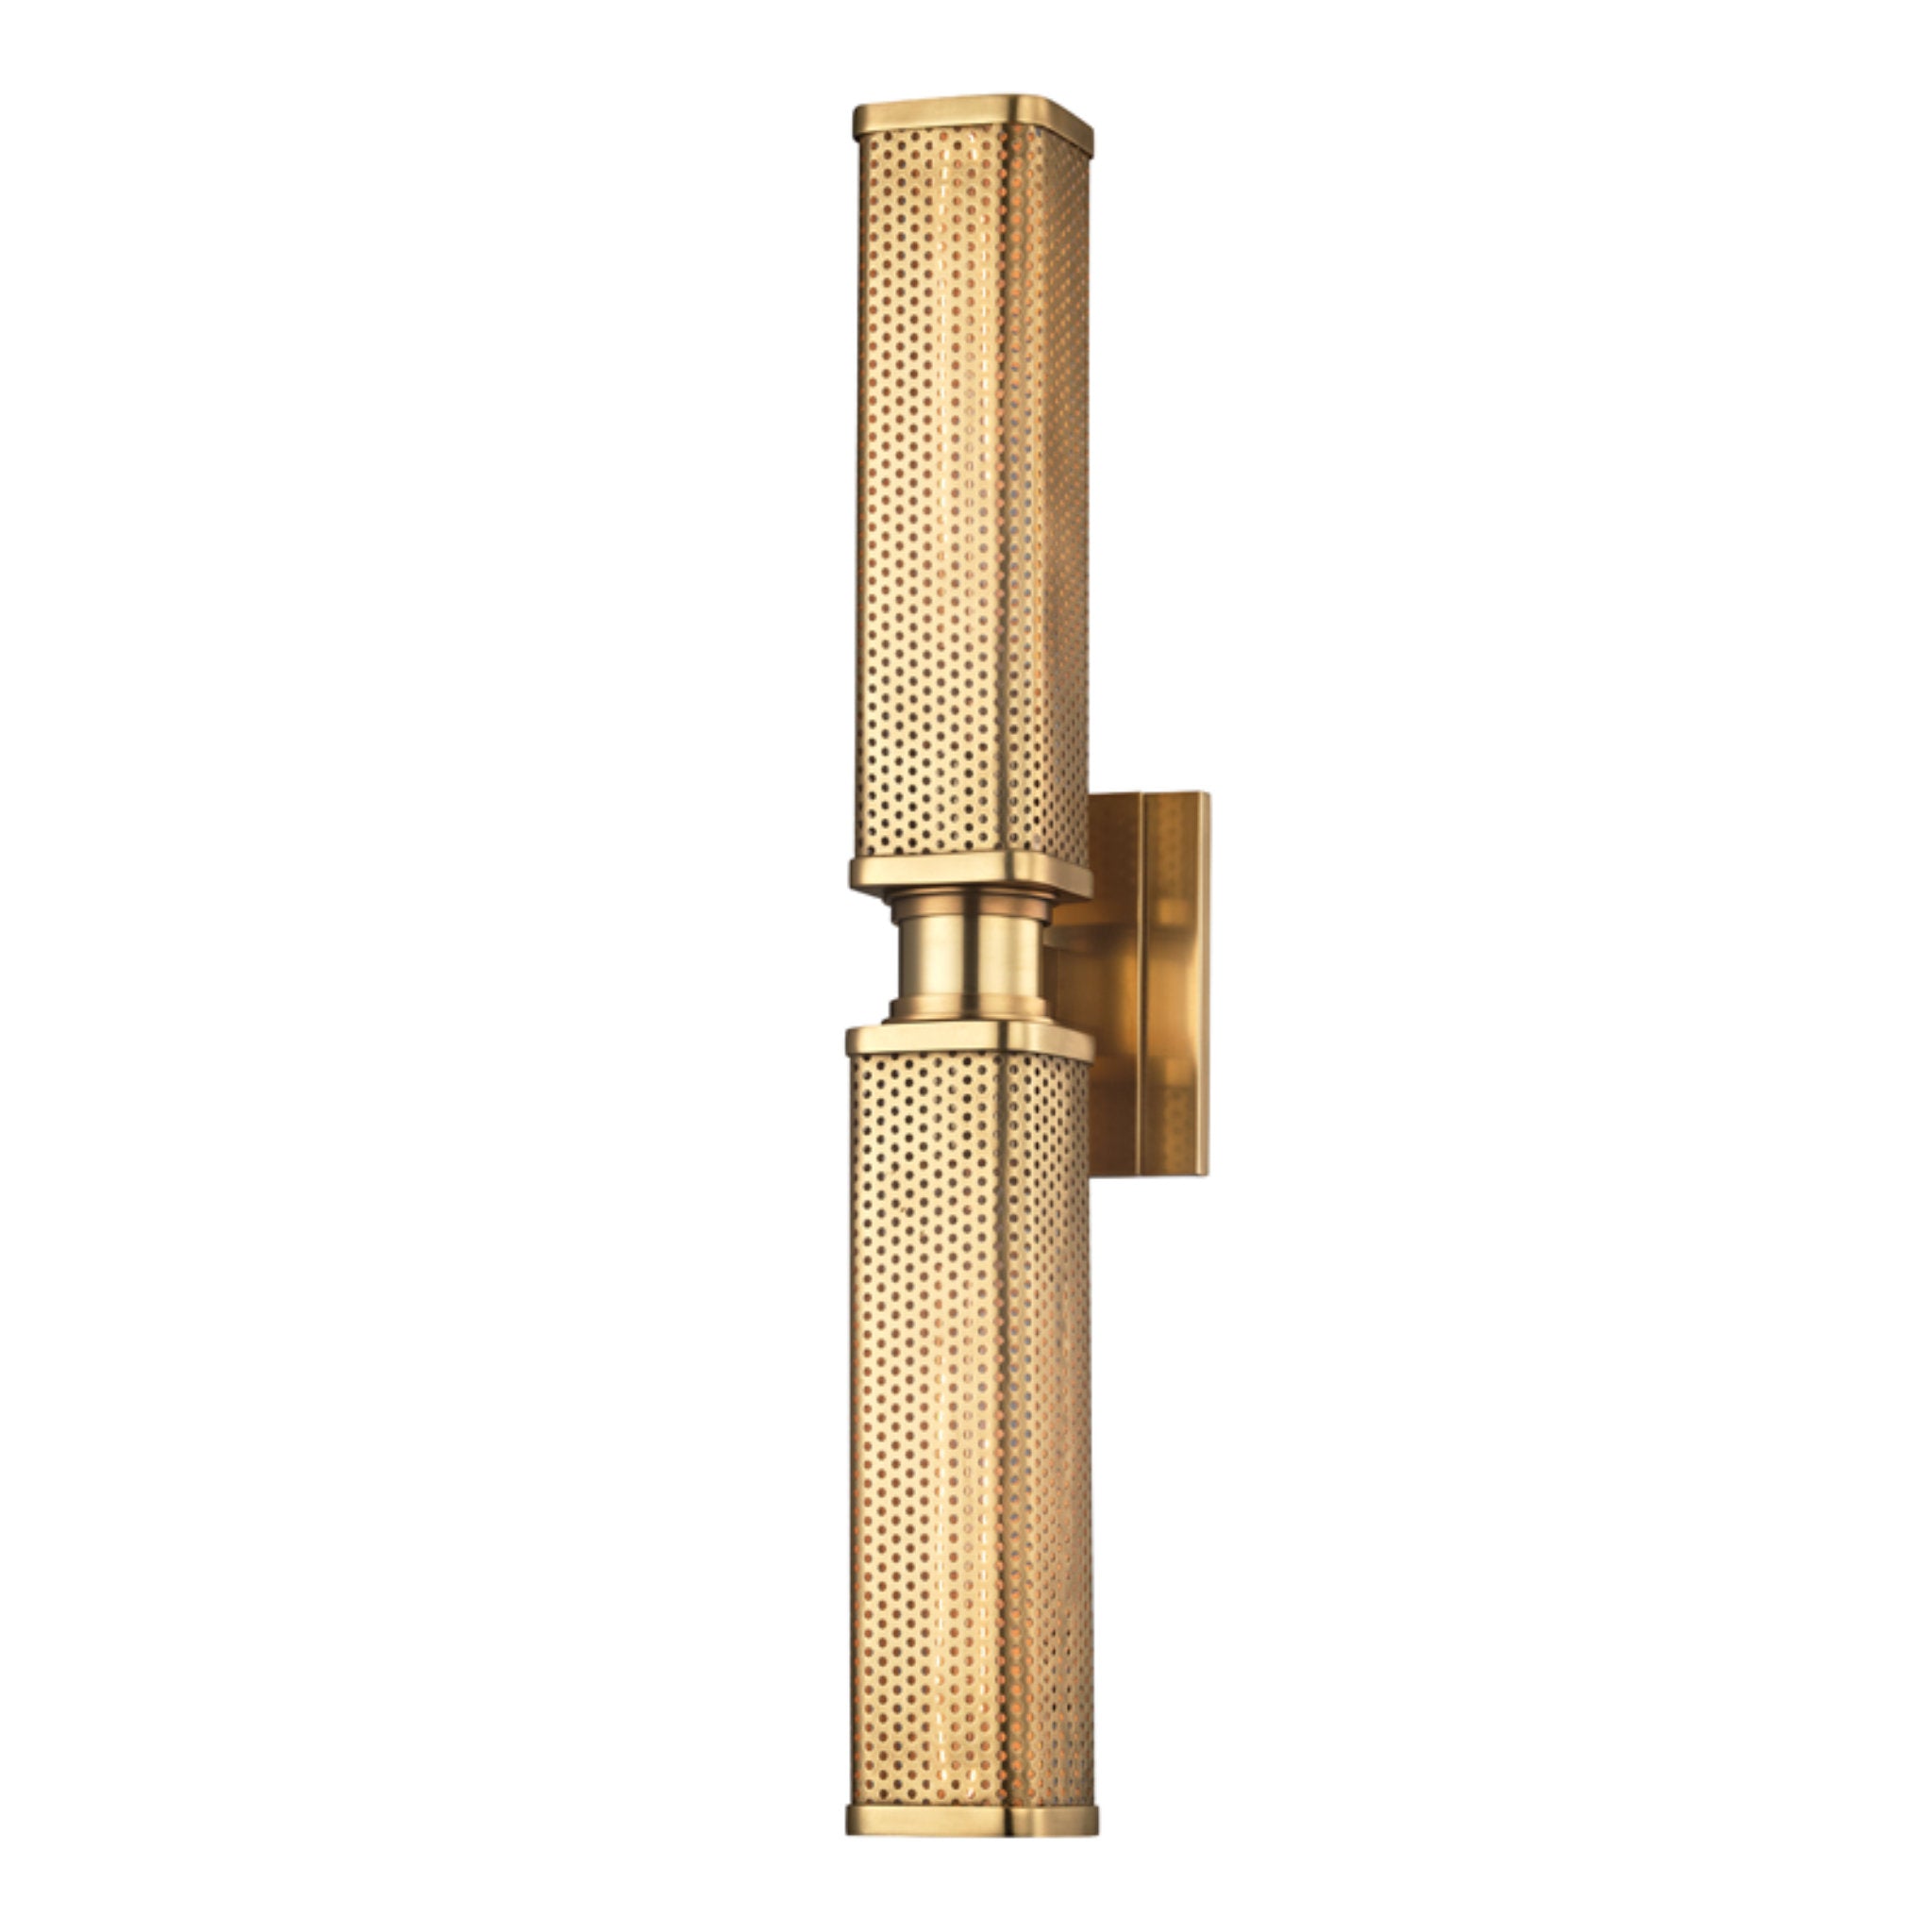 Gibbs 2 Light Wall Sconce in Aged Brass